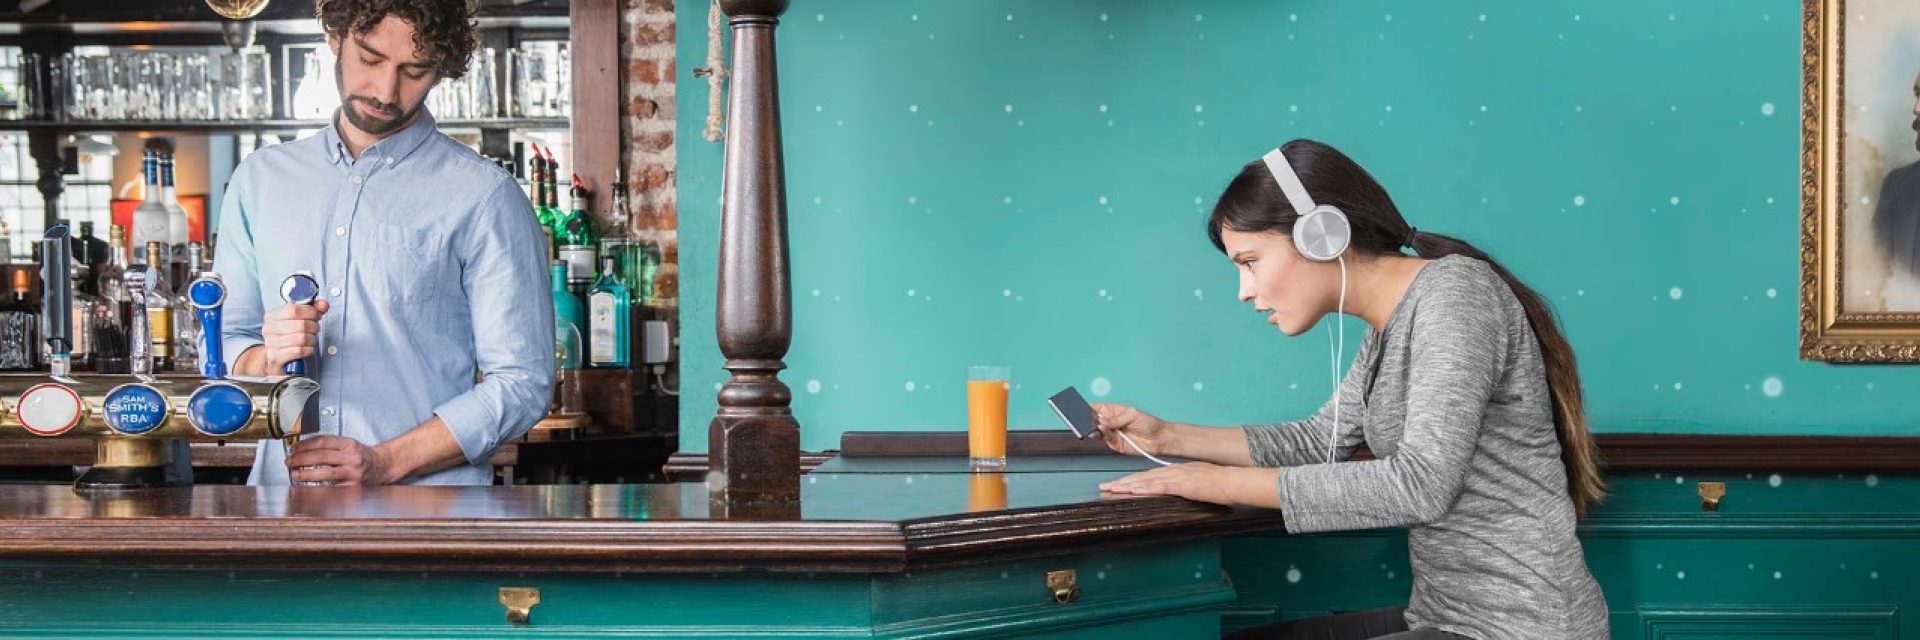 Woman in a pub looking at her phone